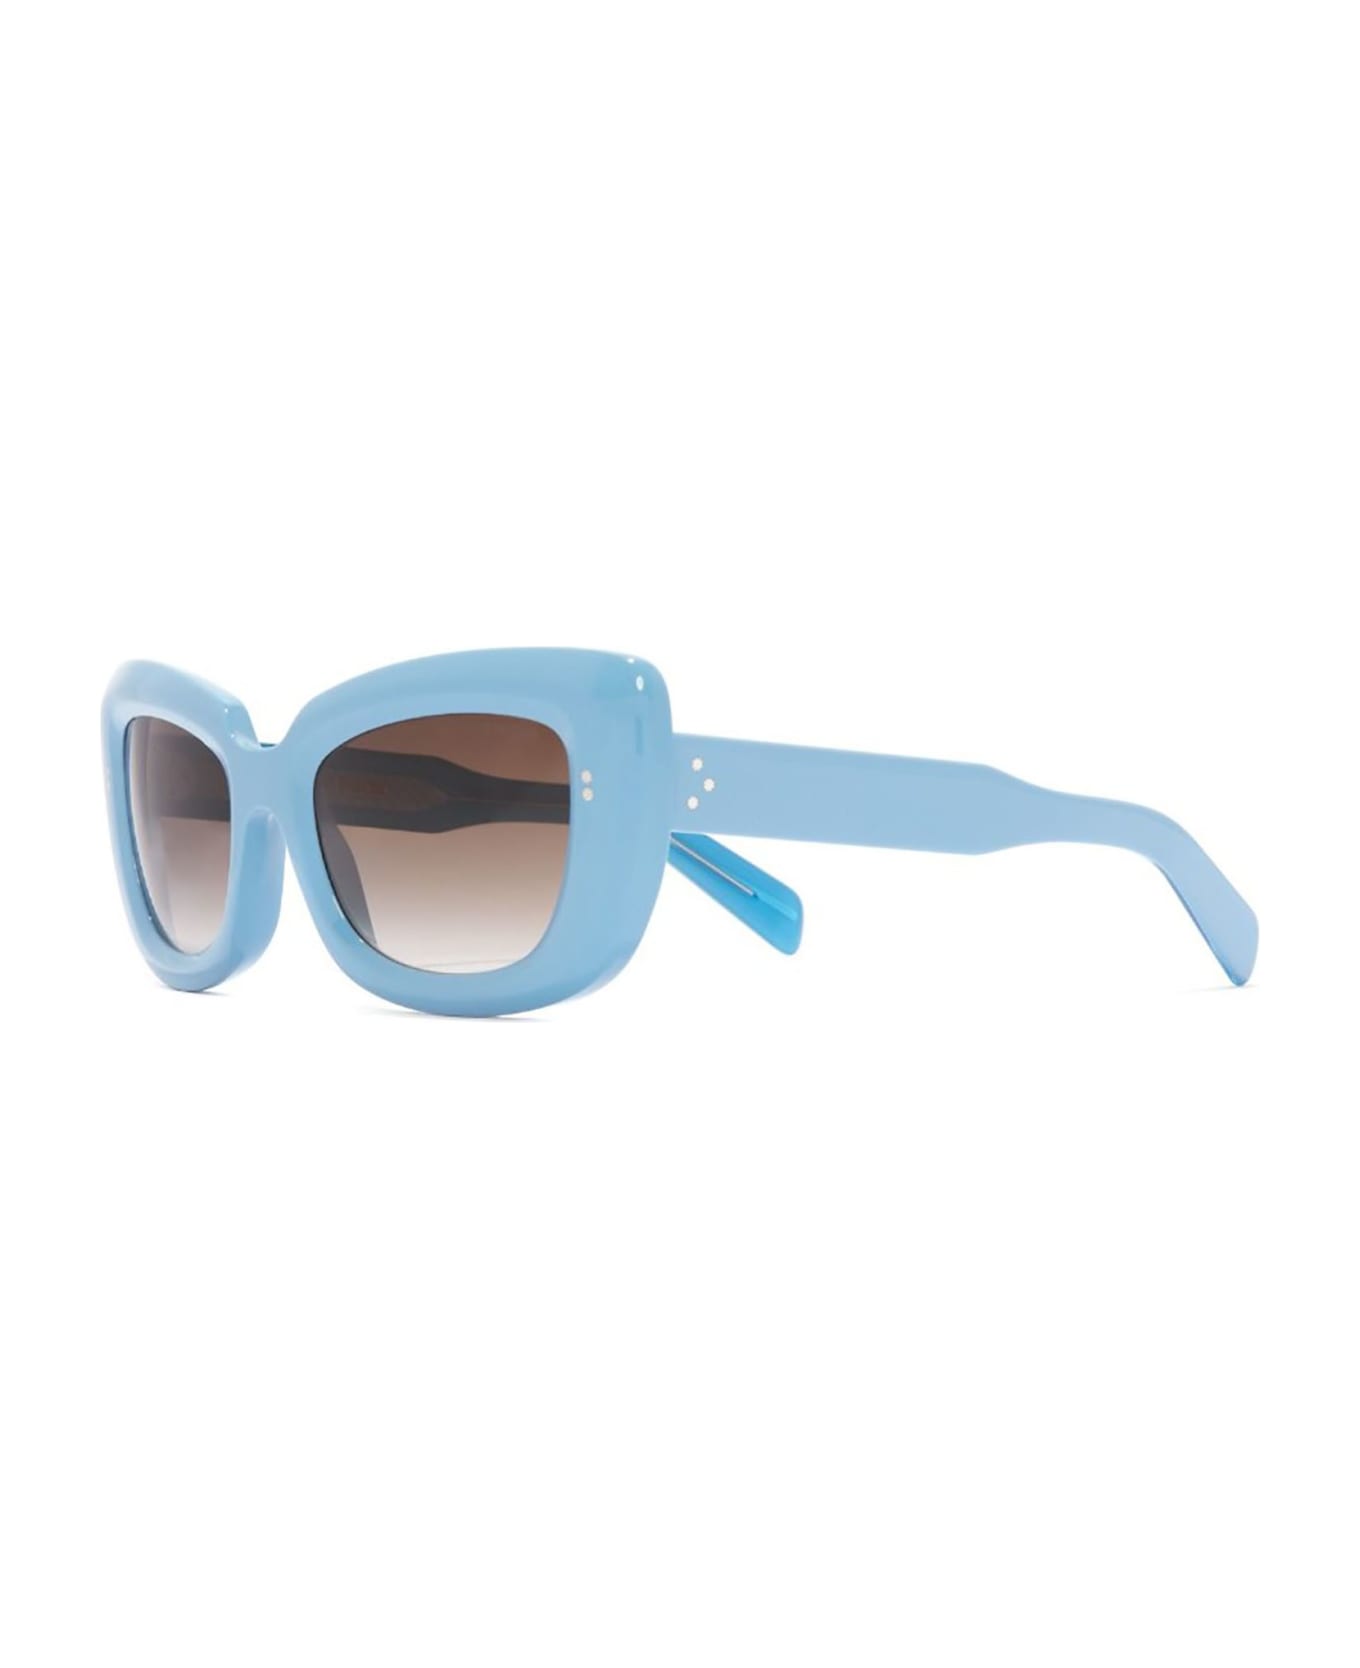 Cutler and Gross 9797 Sunglasses - Solid Ligth Blue